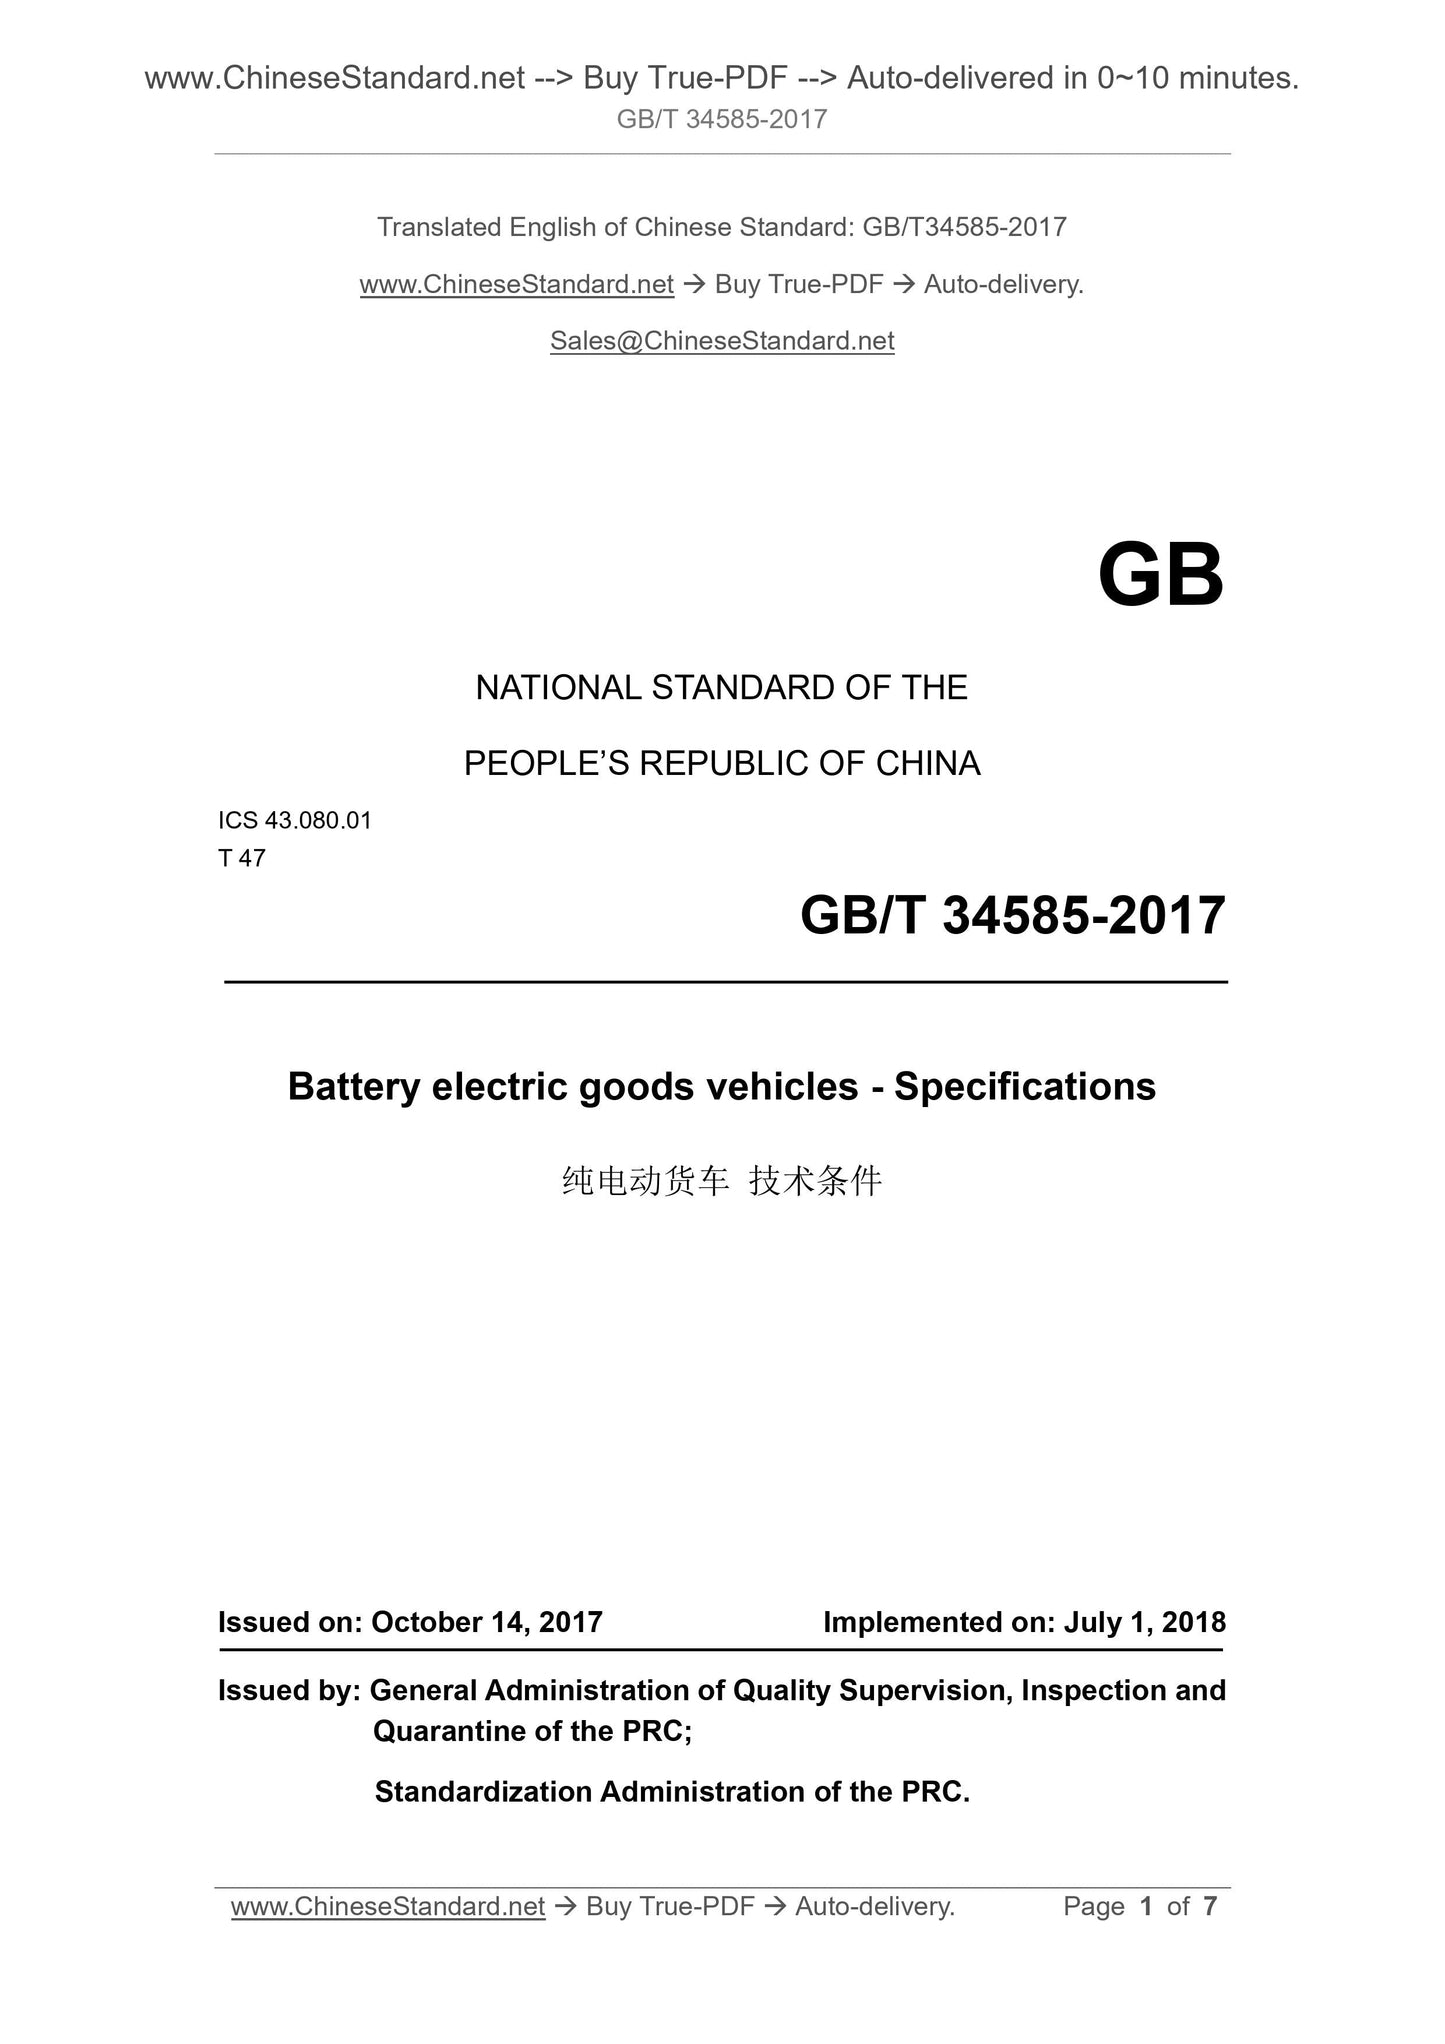 GB/T 34585-2017 Page 1